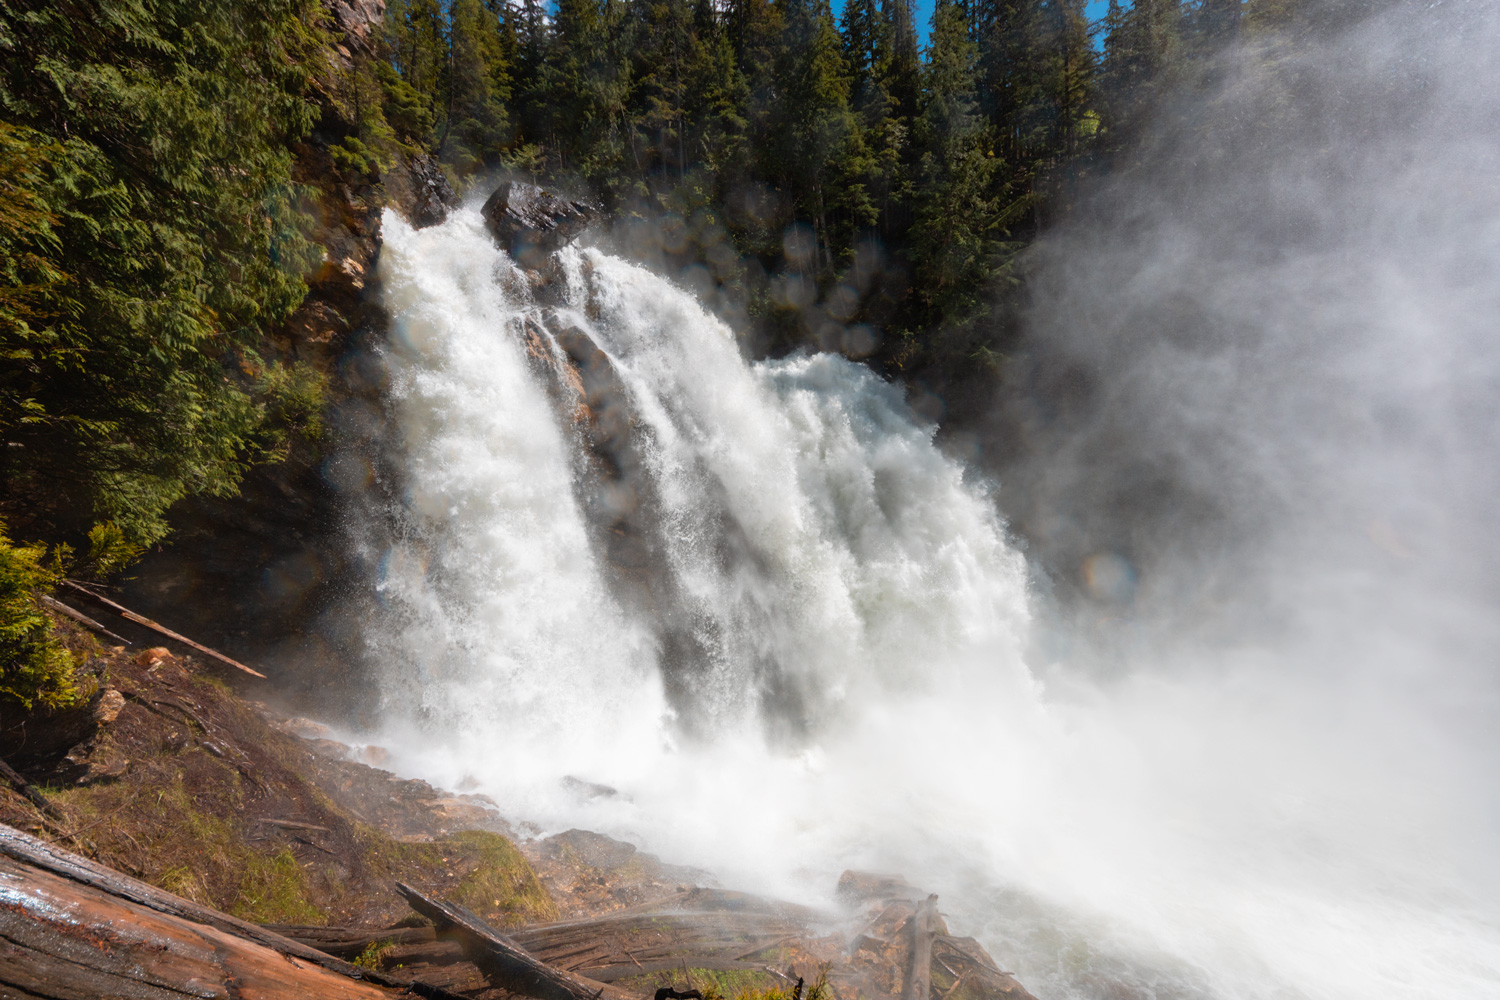 Water thunders over Rainbow Falls in Monashee Provincial Park in June